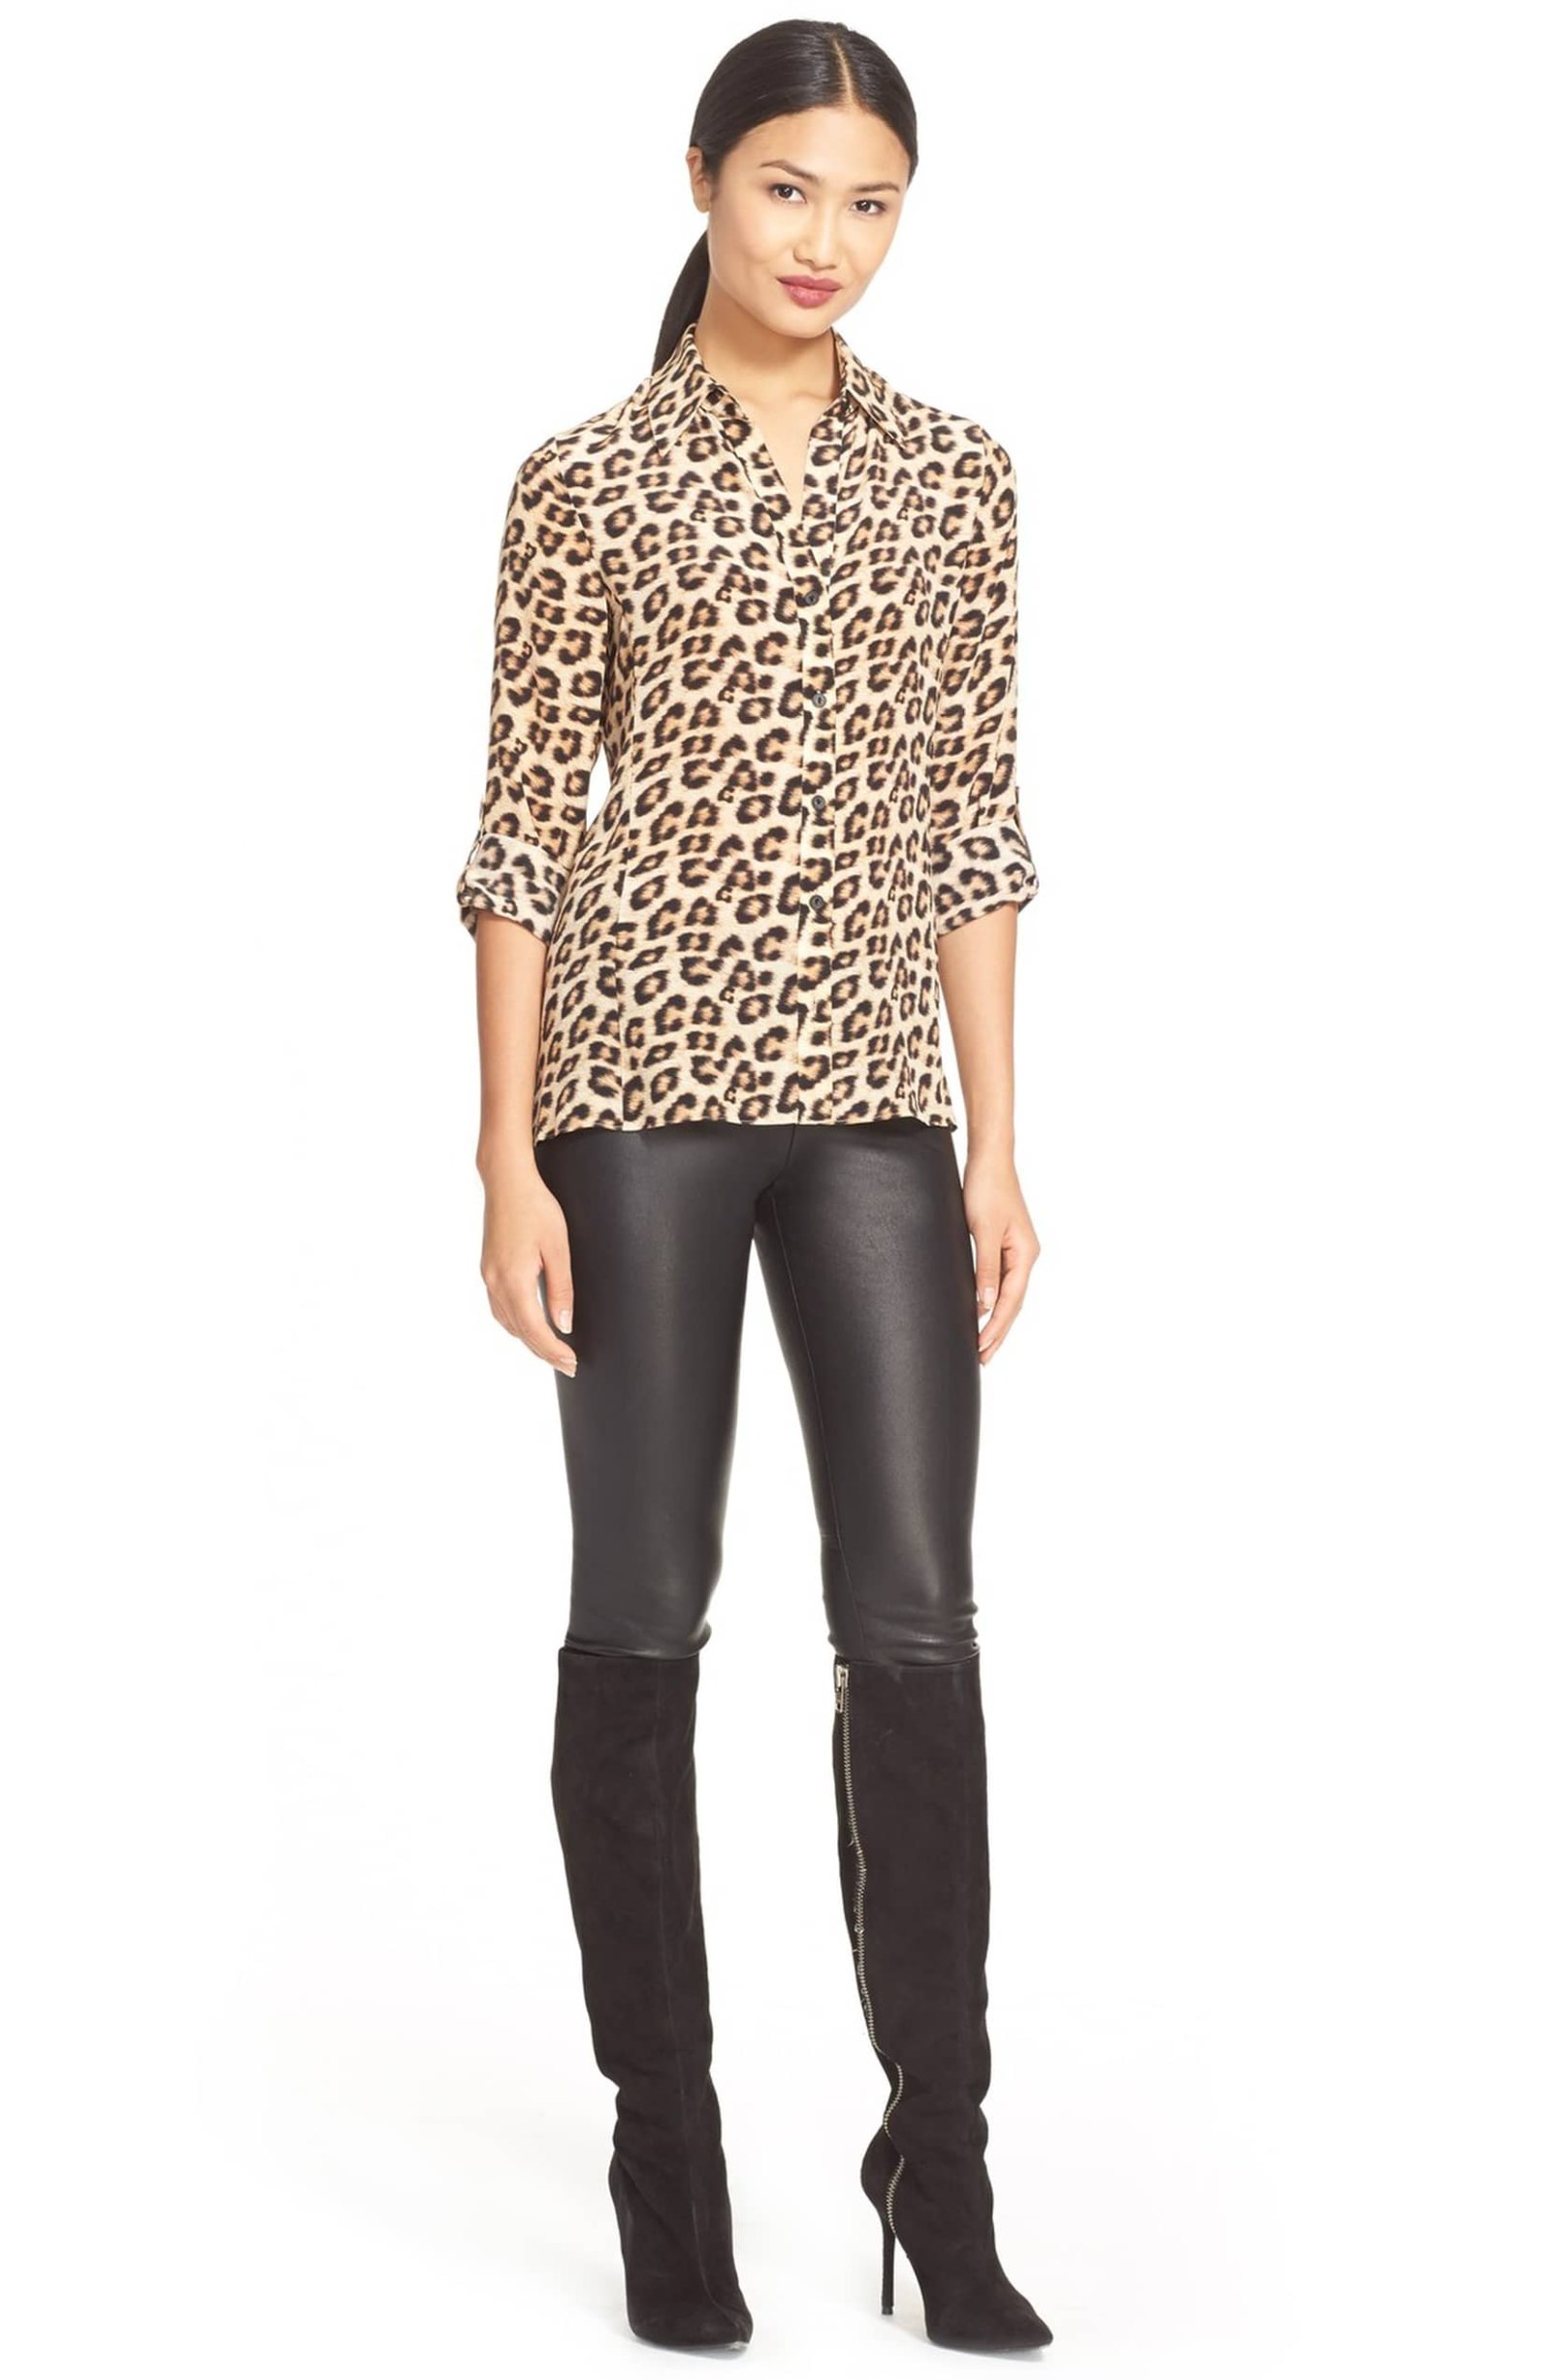 Shop Edgy Alice + Olivia Leather Leggings at Nordstrom | Us Weekly